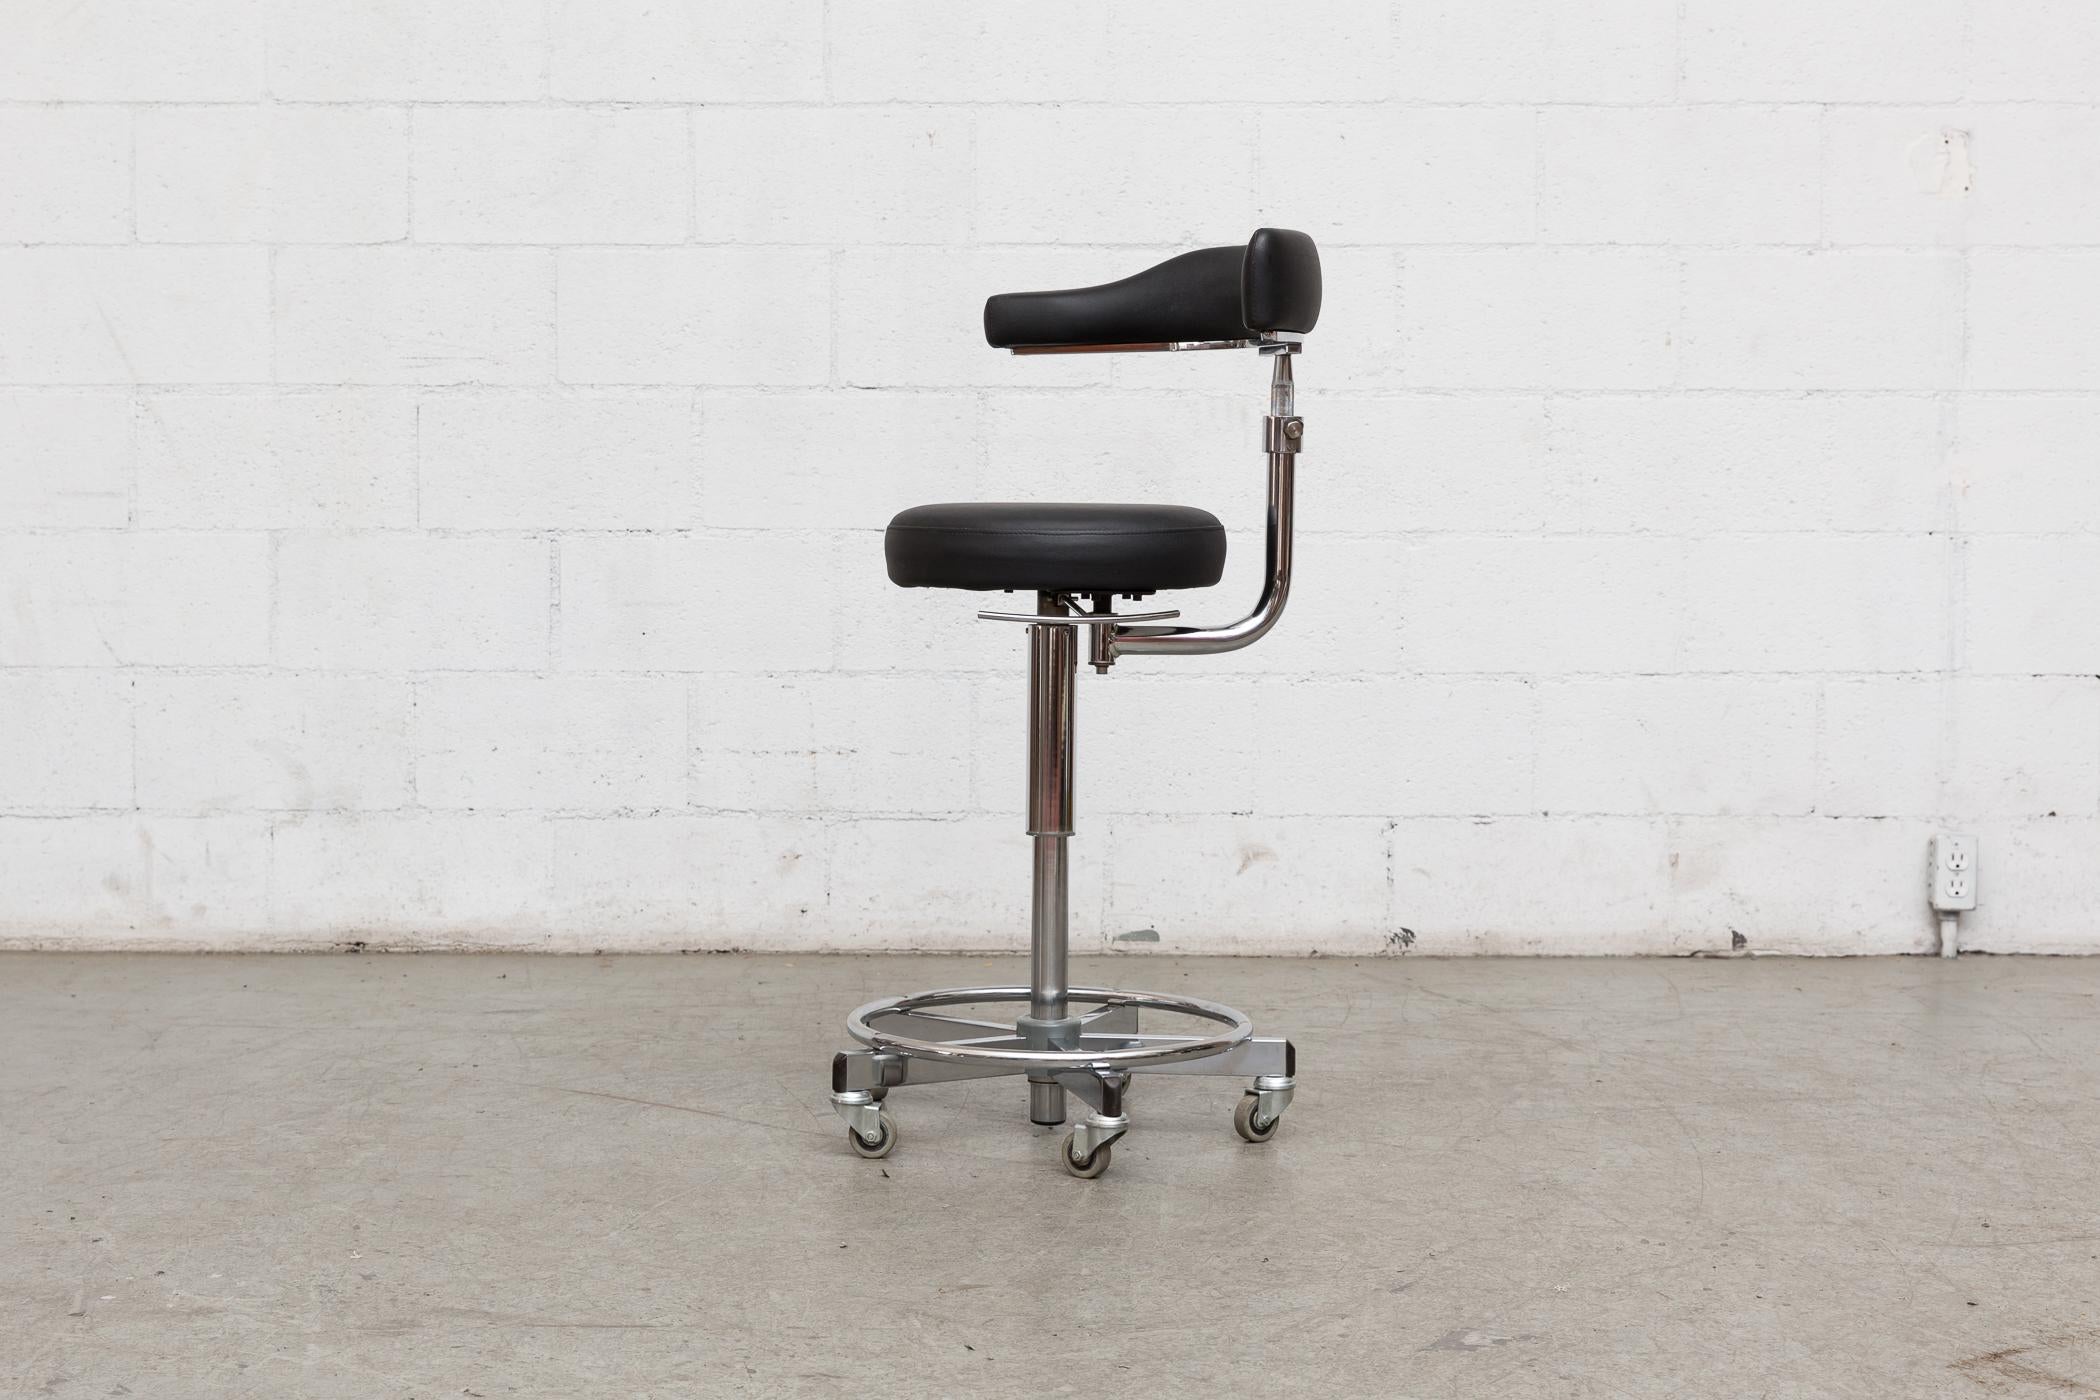 Rolling German dentist chair with asymetric seat back, black leather upholstery and chrome frame with adjustable height. Rubber bumper details on footrest.